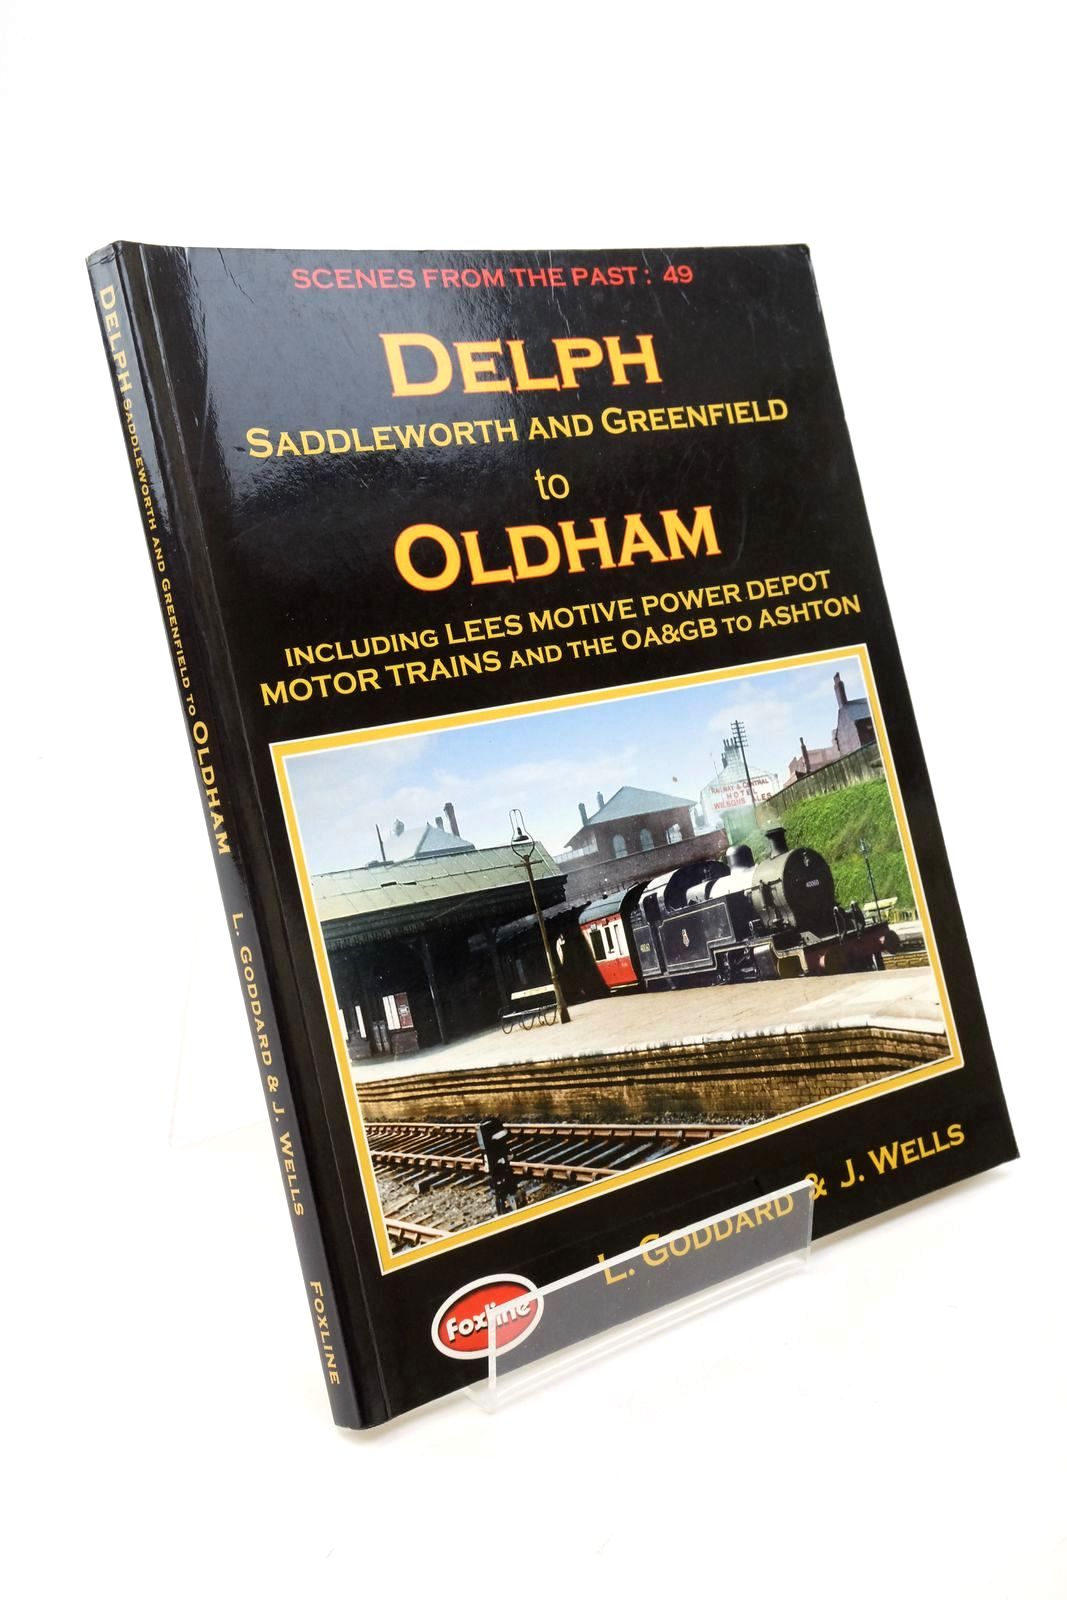 Photo of DELPH SADDLEWORTH AND GREENFIELD TO OLDHAM (SCENES FROM THE PAST: 49) written by Goddard, Larry Wells, Jeffrey published by Foxline (STOCK CODE: 1322473)  for sale by Stella & Rose's Books